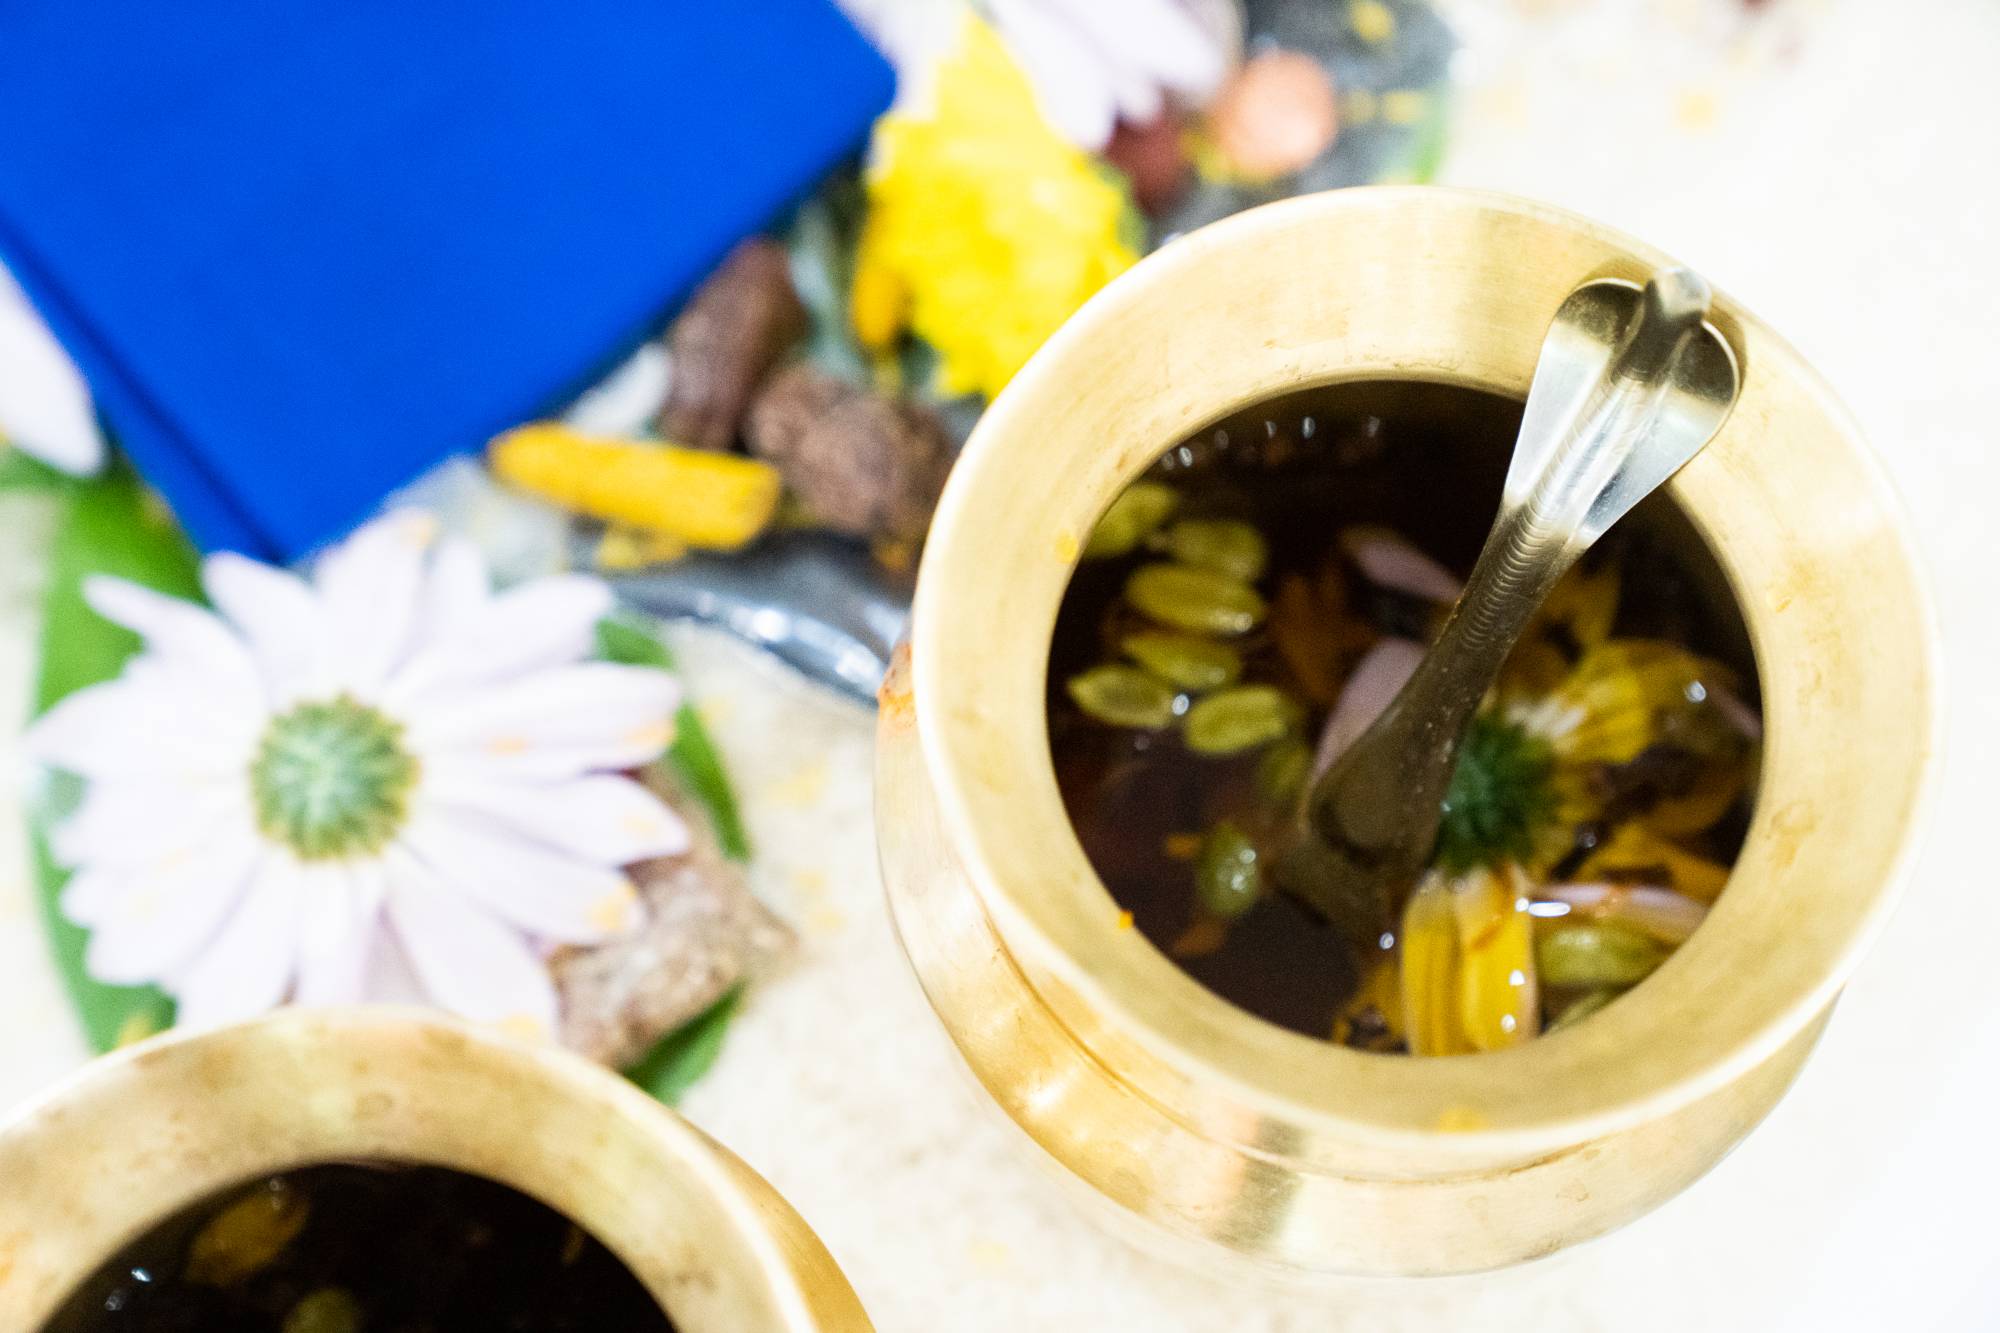 An image of flowers and medicinal beverage in a copper cup